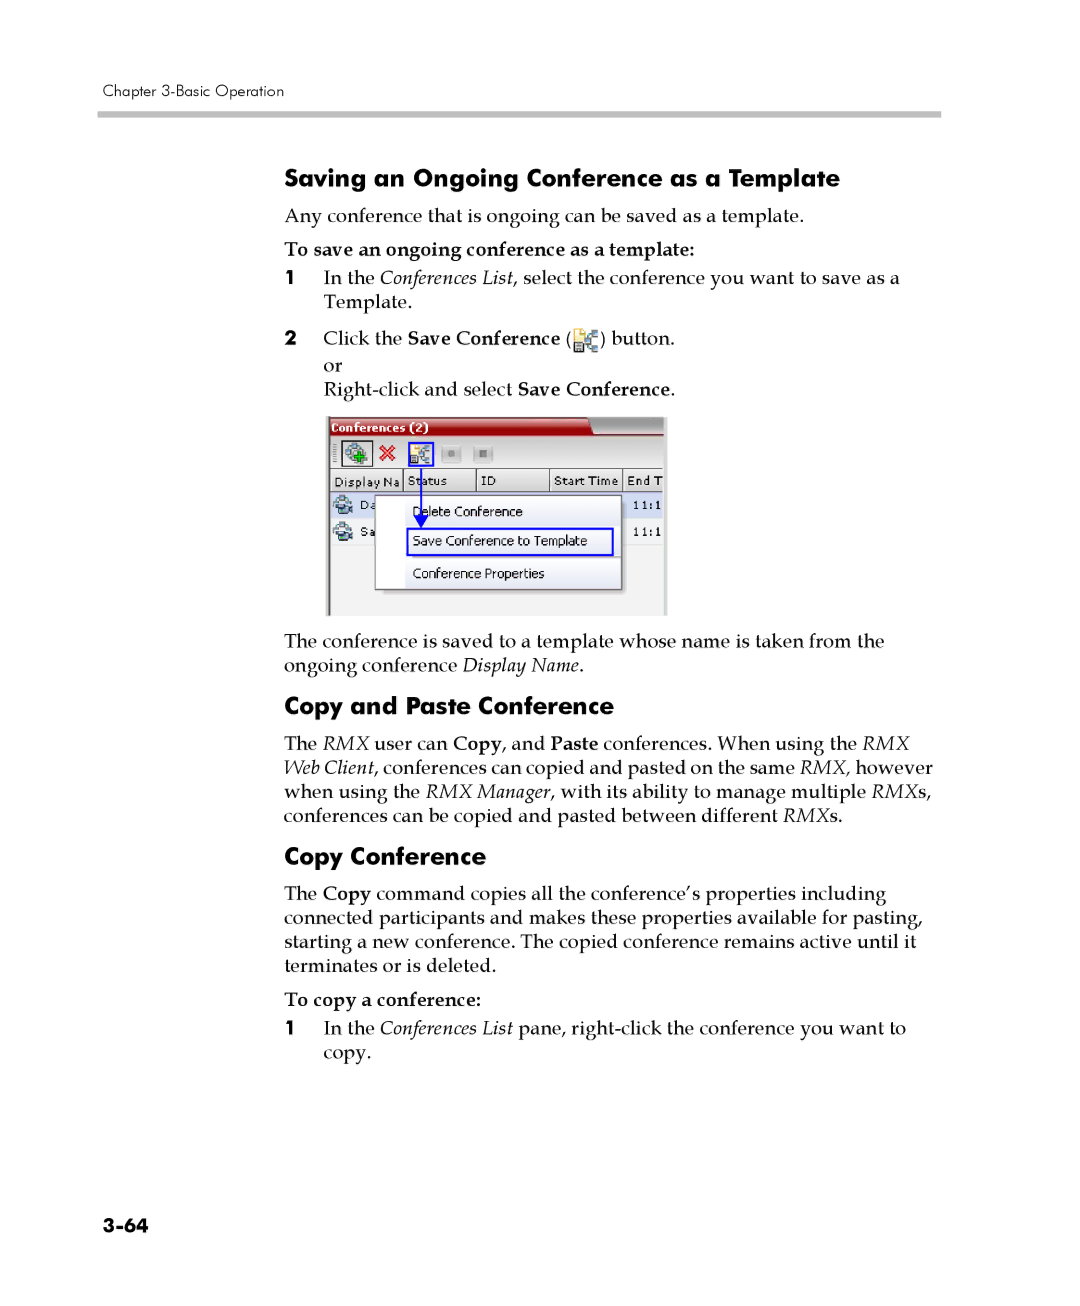 Polycom DOC2560C manual Saving an Ongoing Conference as a Template, Copy and Paste Conference, Copy Conference 